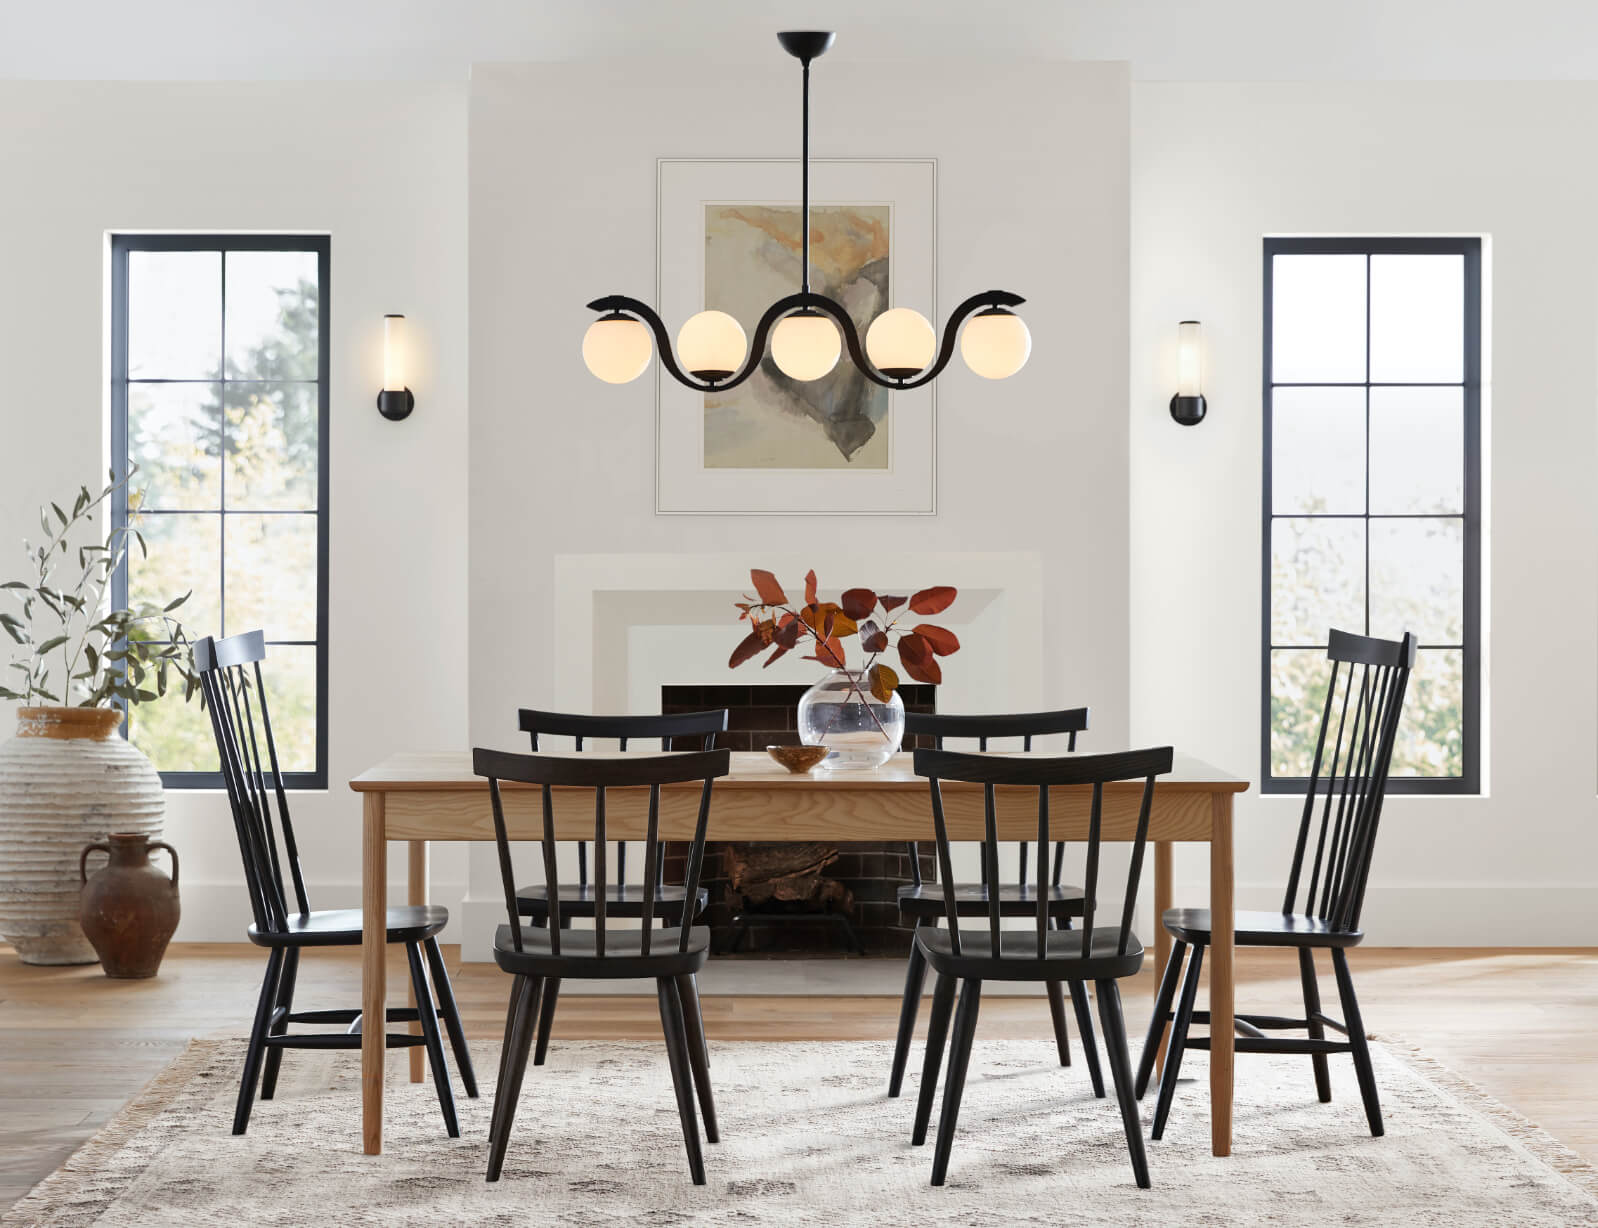 How To Choose Dining Room Lighting, Pendant Light Fitting Over Dining Table